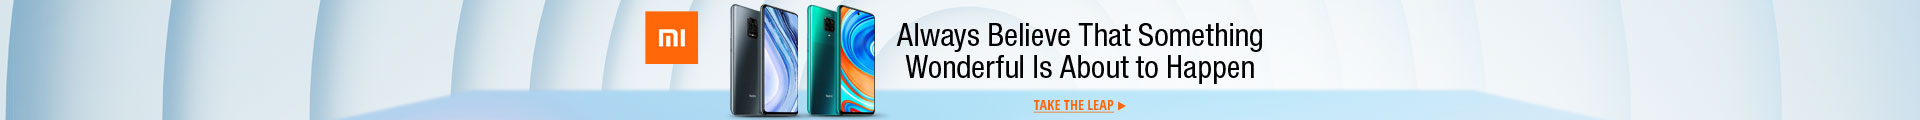 Always believe that something wonderful is about to happen